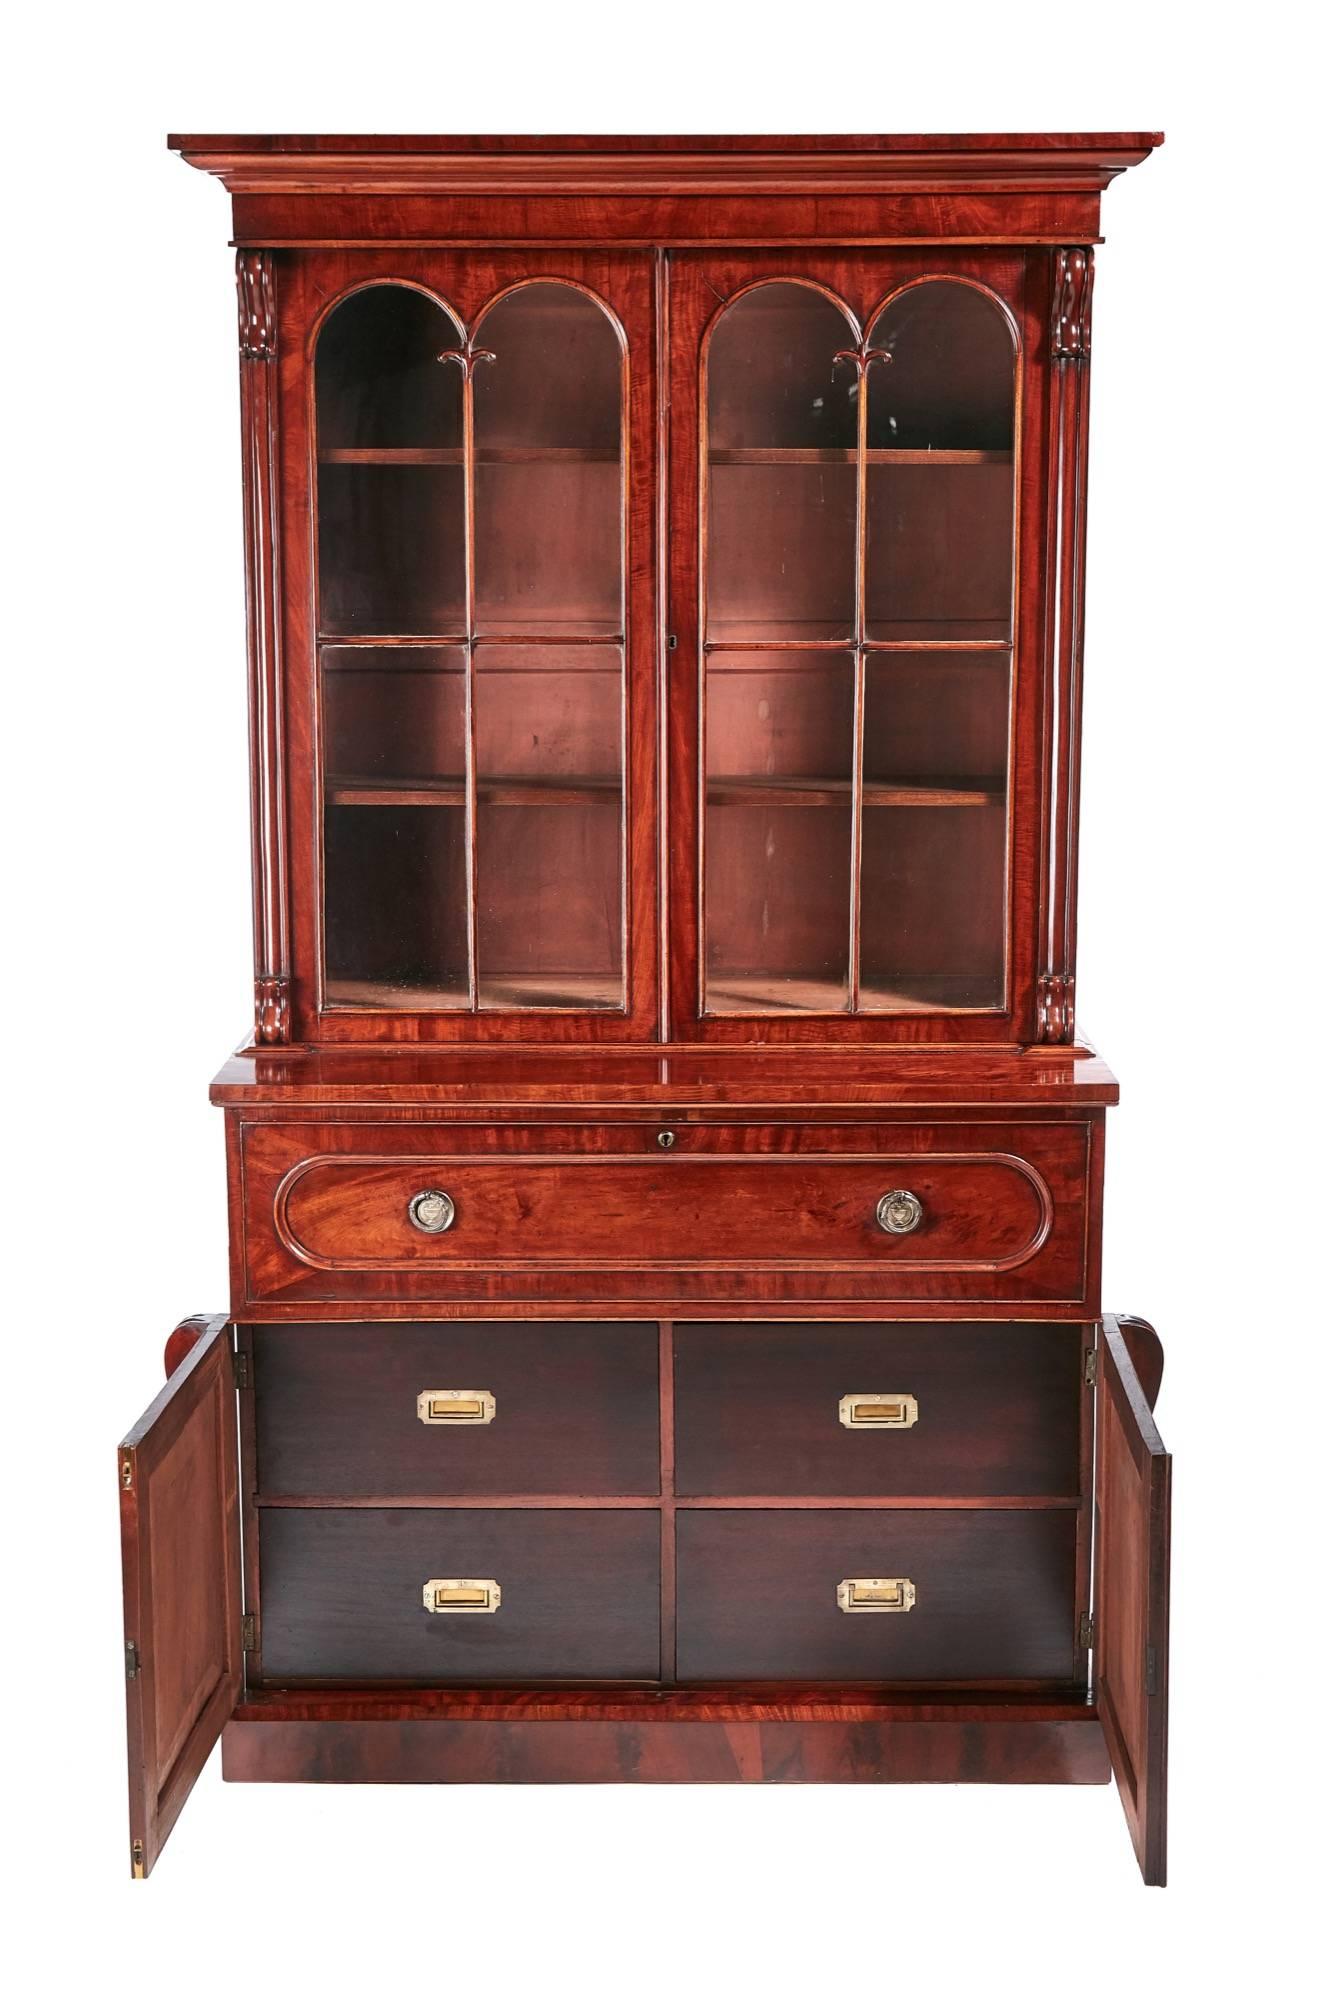 Fine quality William IV mahogany secretaire bookcase, with a shaped cornice, two lovely carved glazed doors, three adjustable shelves, the secretaire drawer opens to reveal a fitted interior and a leather writing surface, below two-carved mahogany